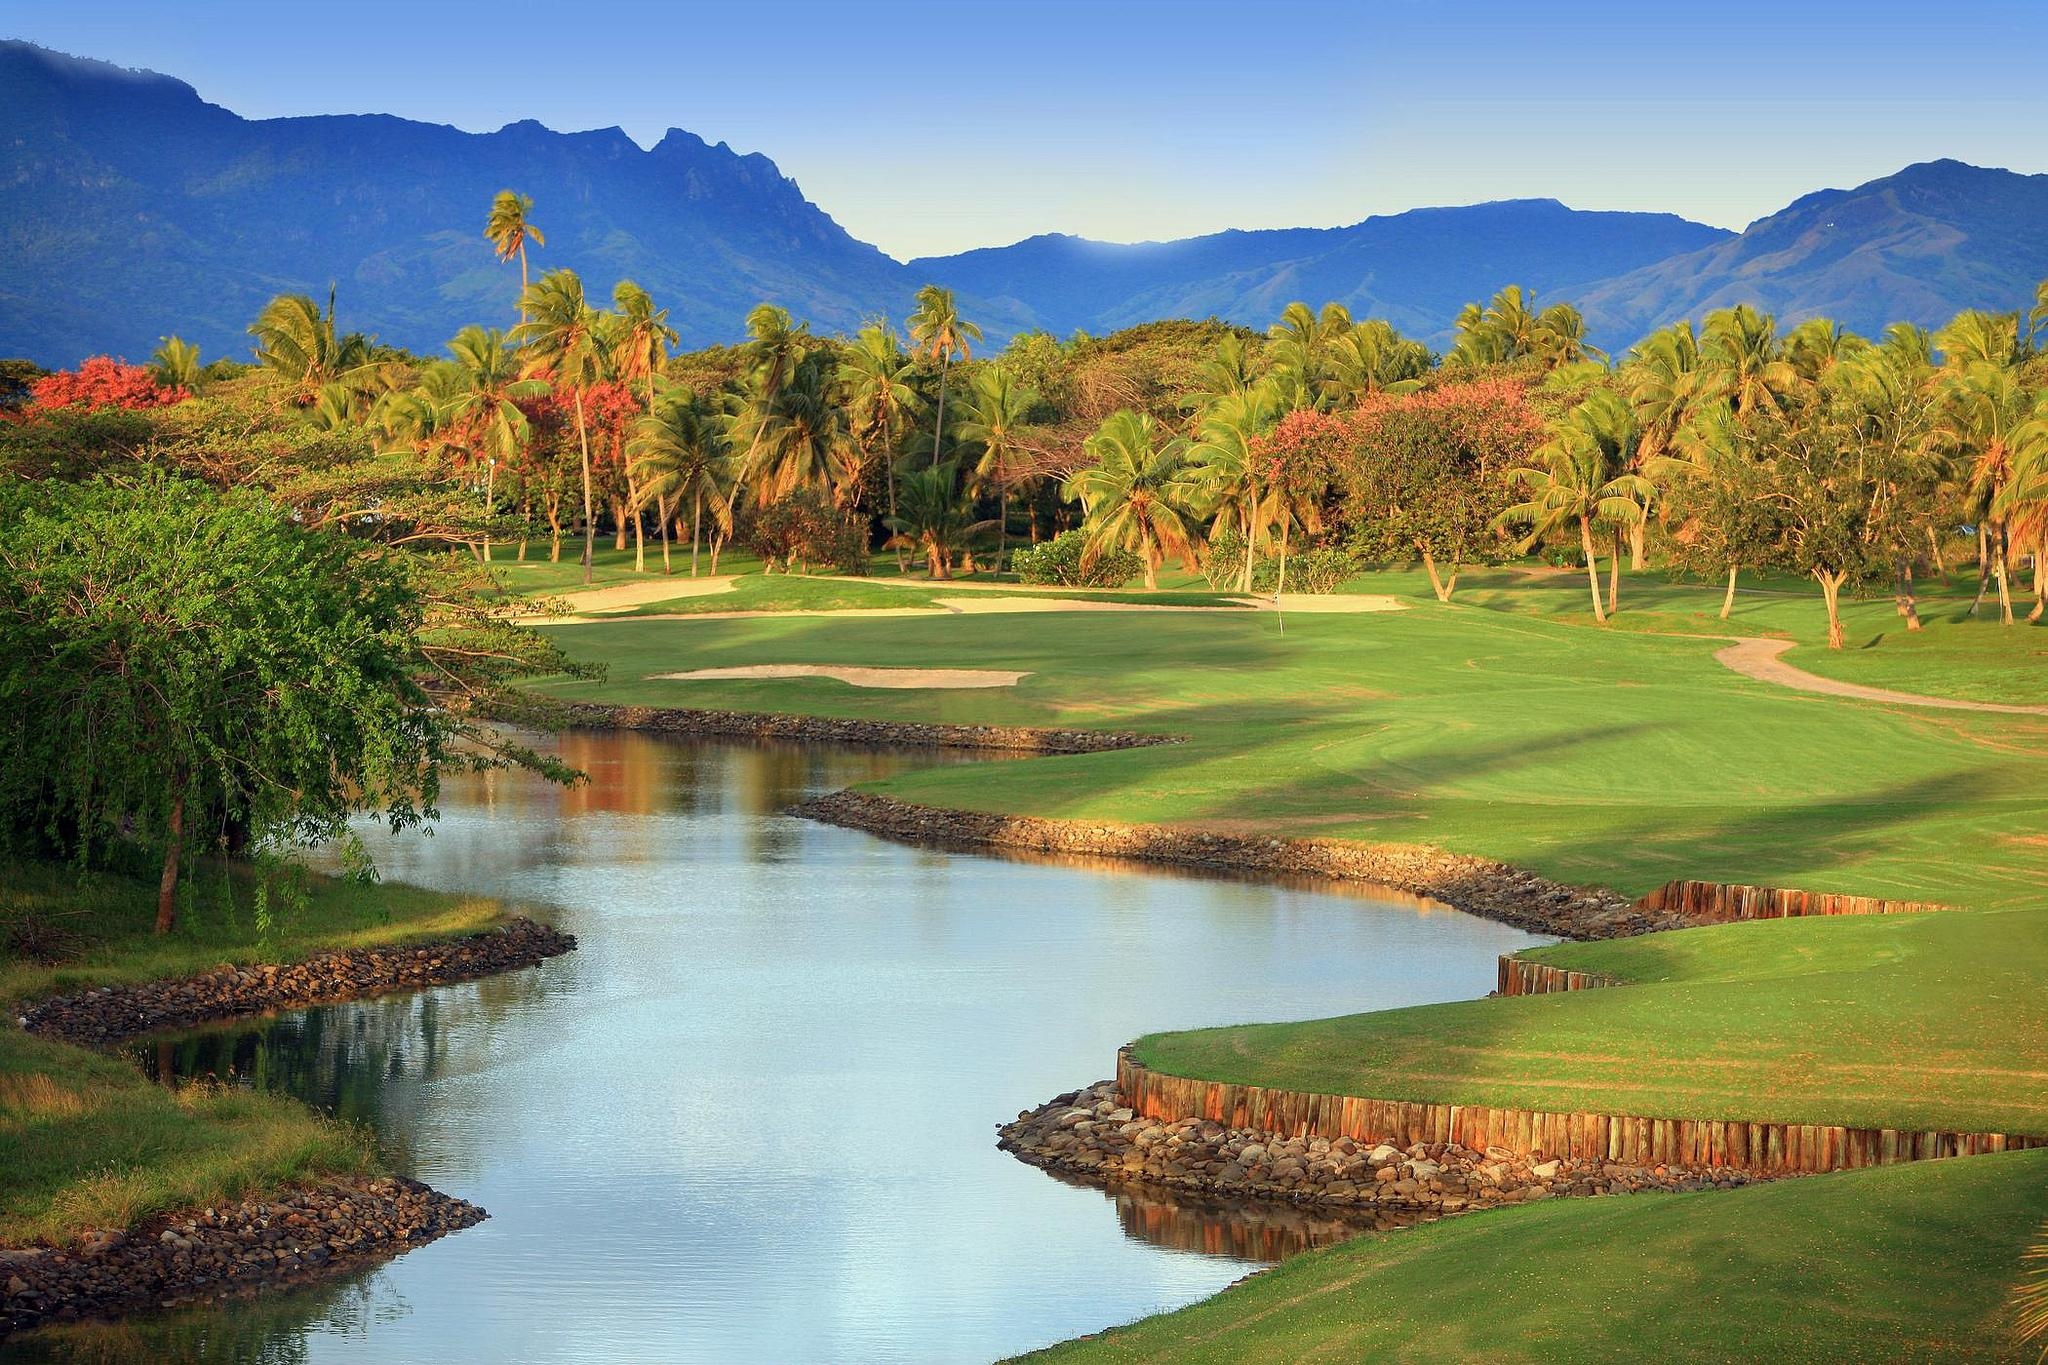 Golf Course: Fiji, Denarau Racquet Club, A game played on a large open area with 9 or 18 holes. 2050x1370 HD Wallpaper.